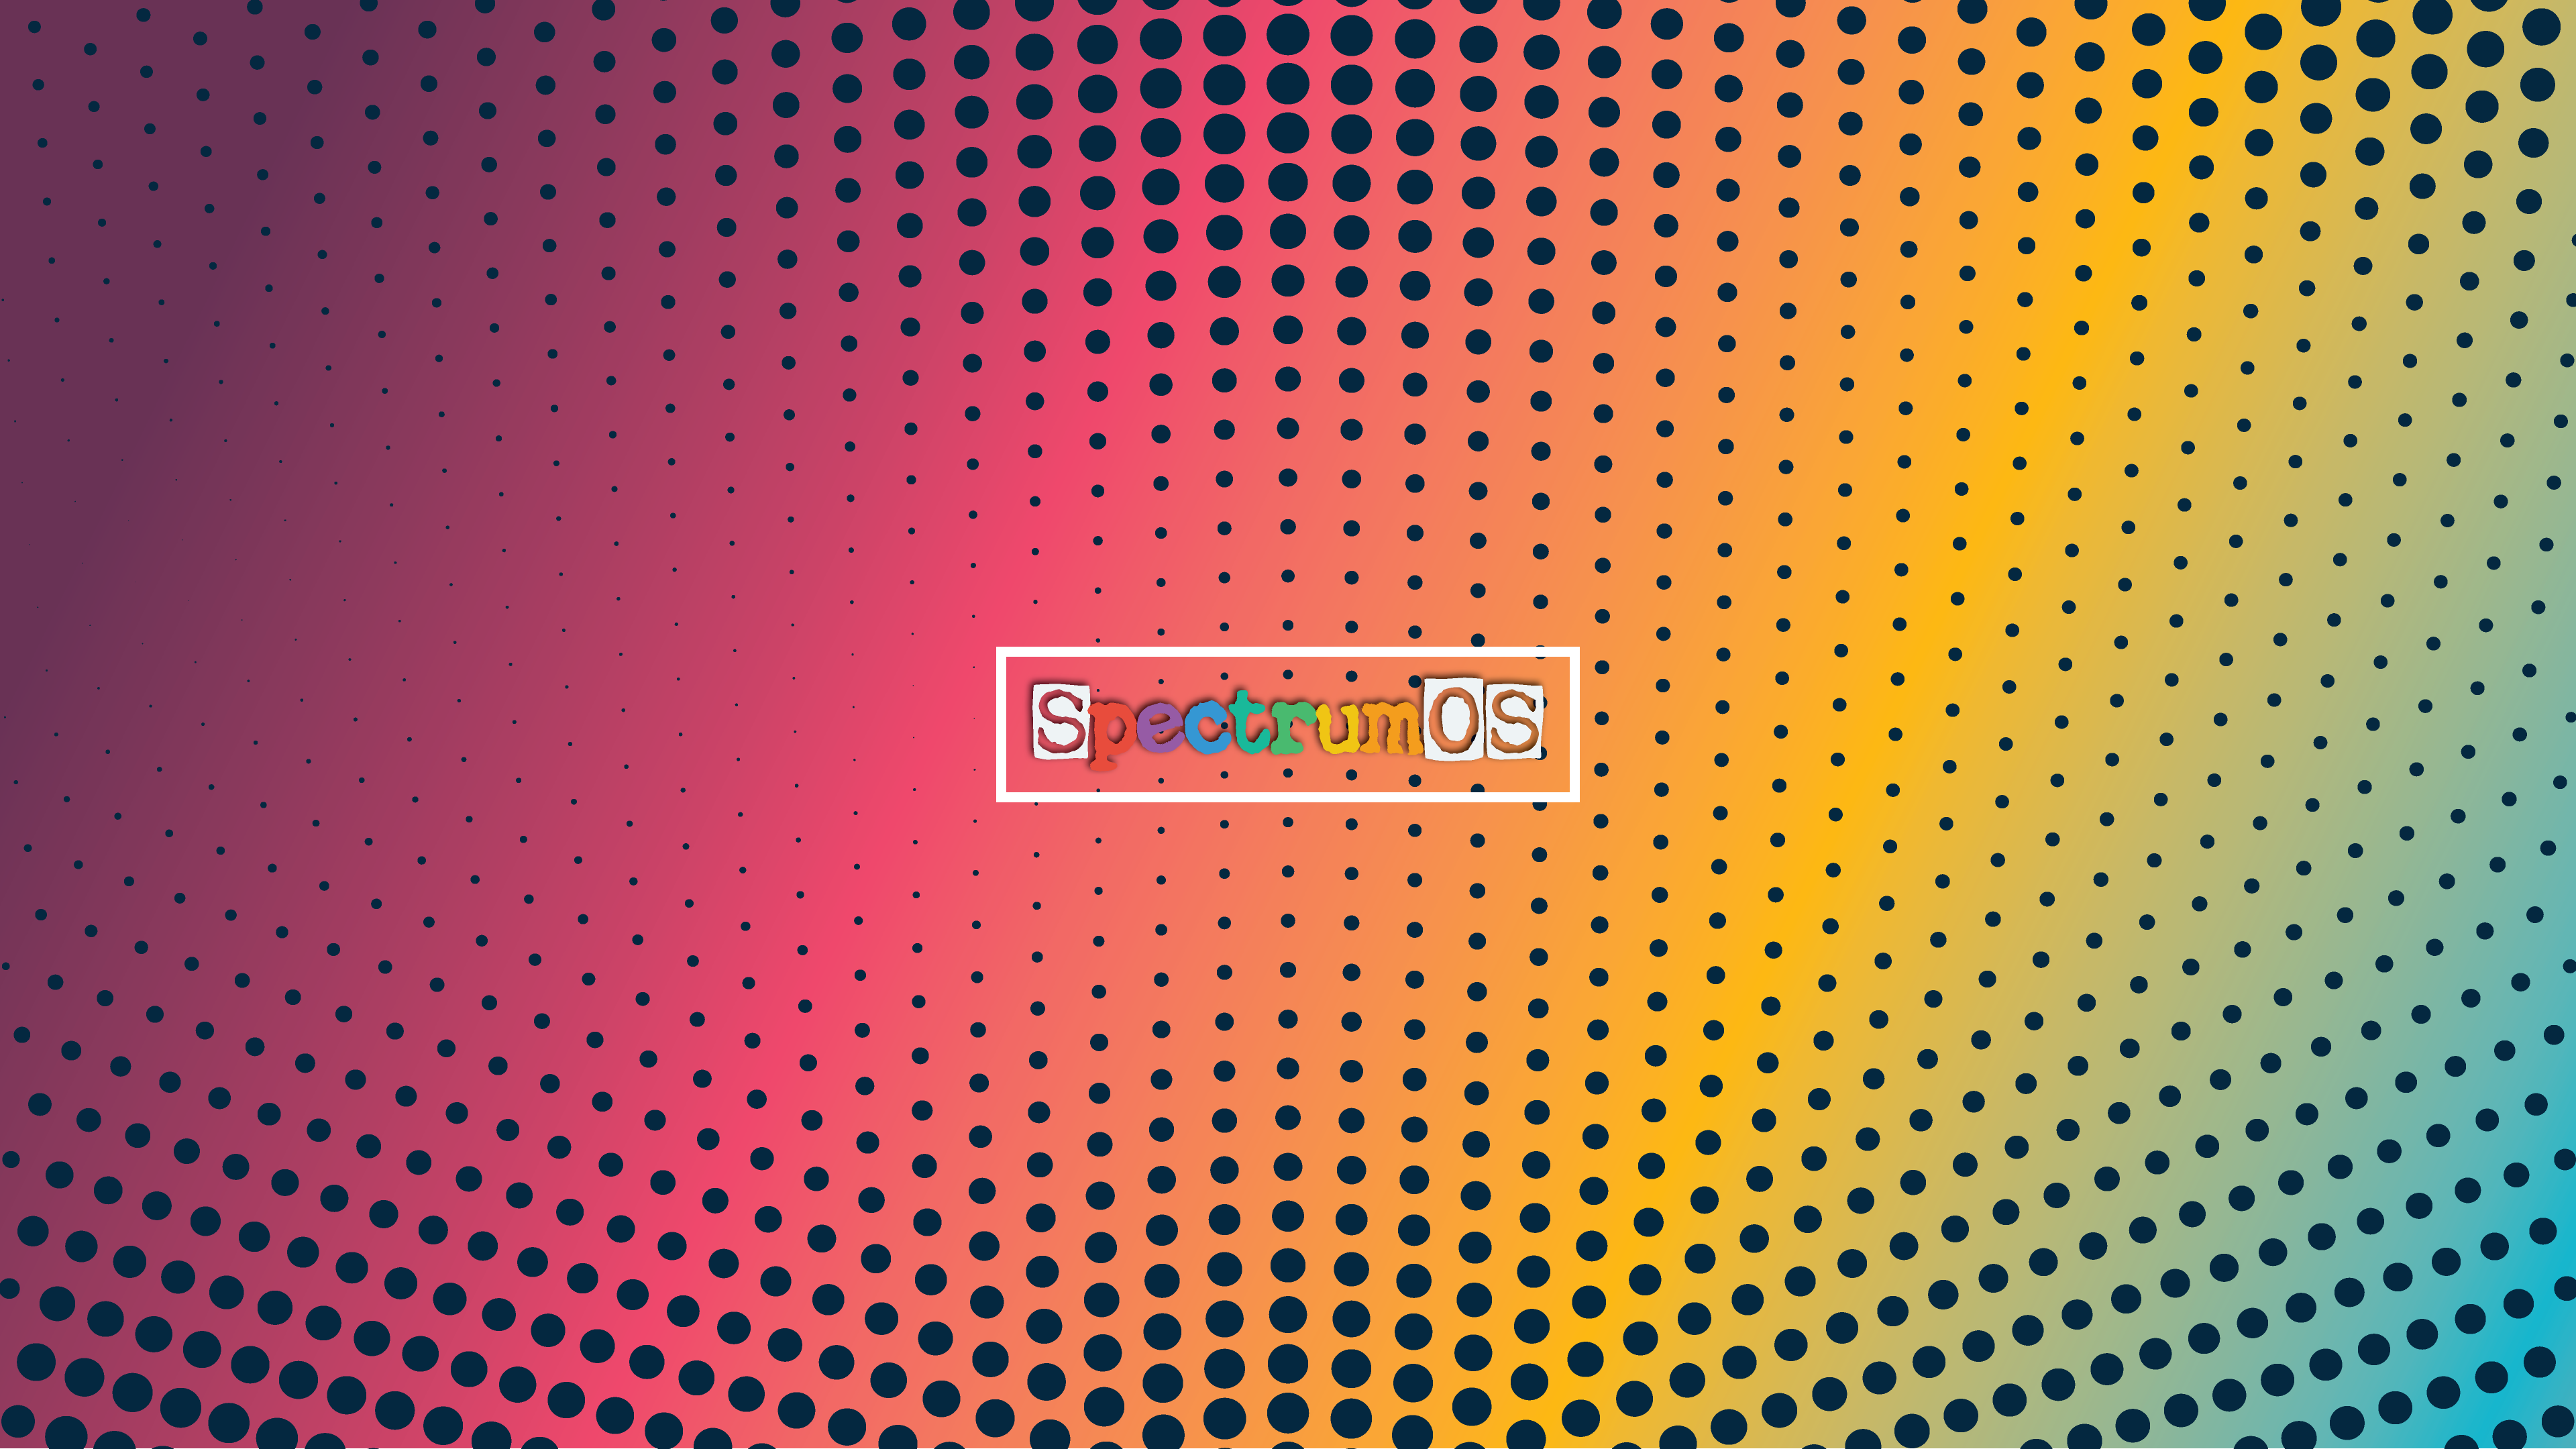 General 3840x2160 Linux SpectrumOS Arch Linux minimalism simple background logo colorful operating system